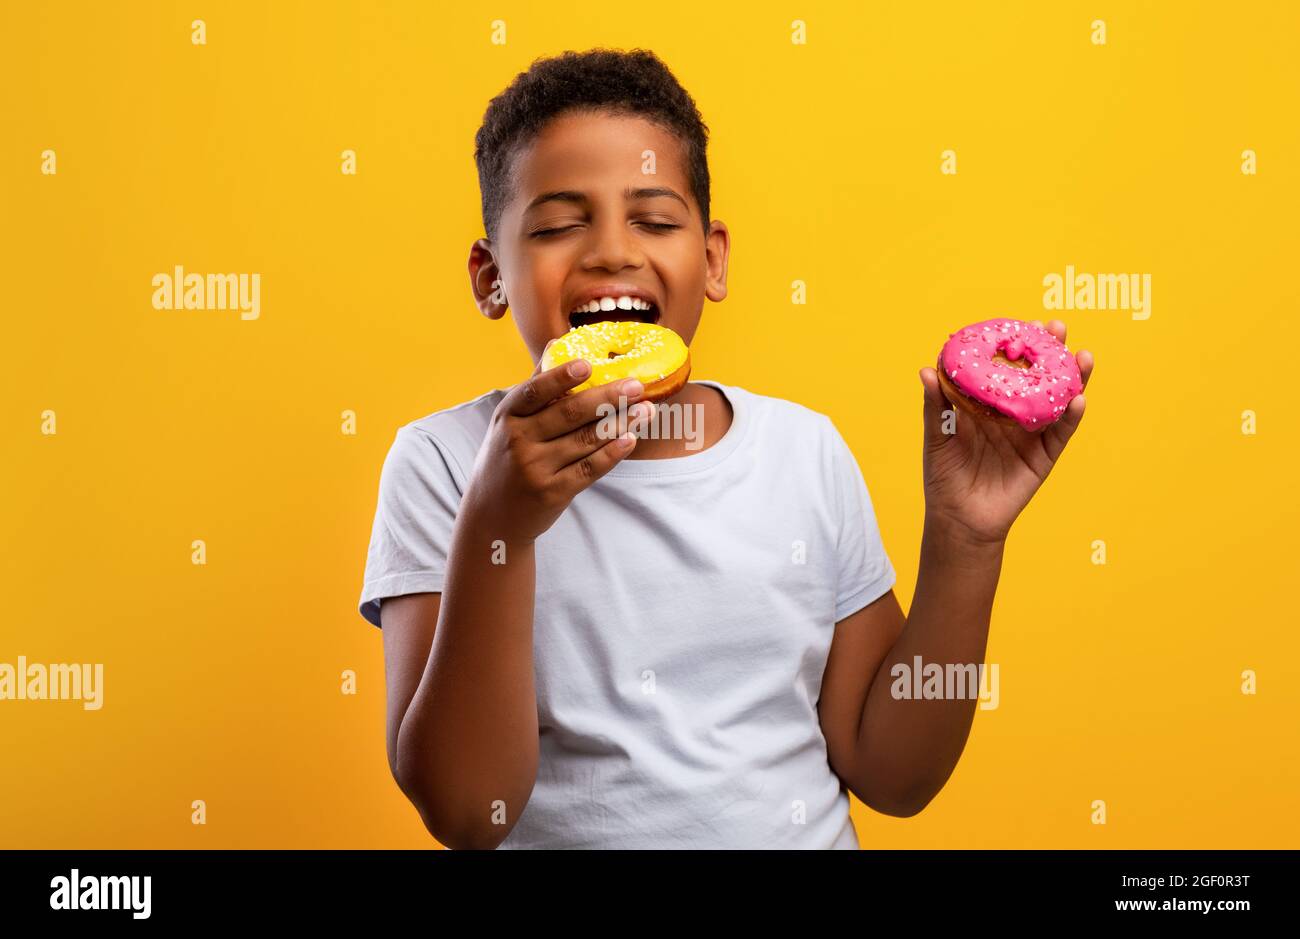 Black boy holding colorful donuts, isolated on yellow background Stock Photo